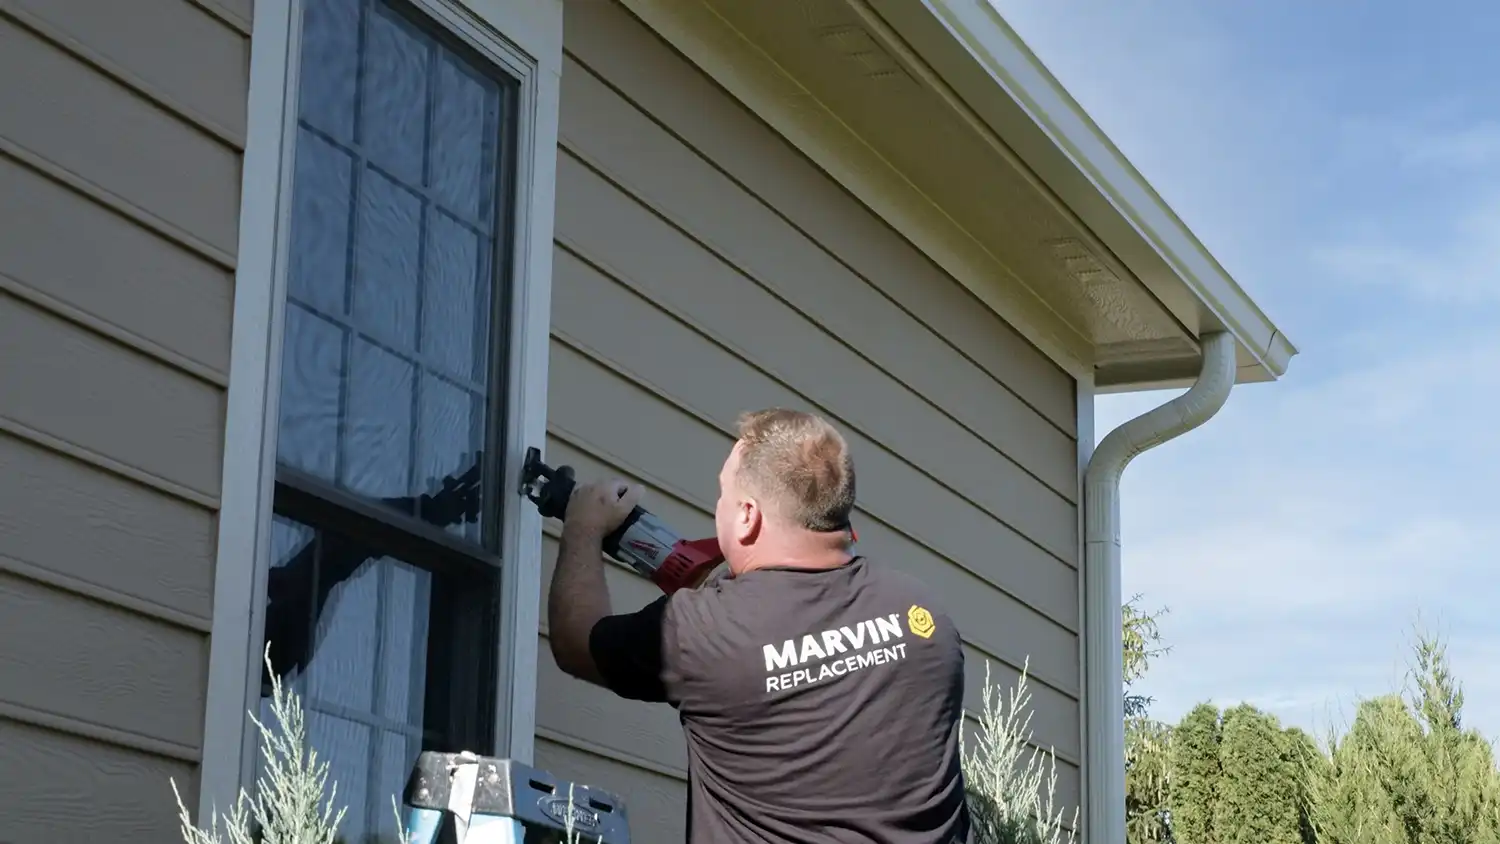 Man uses a reciprocating saw to cut a window frame